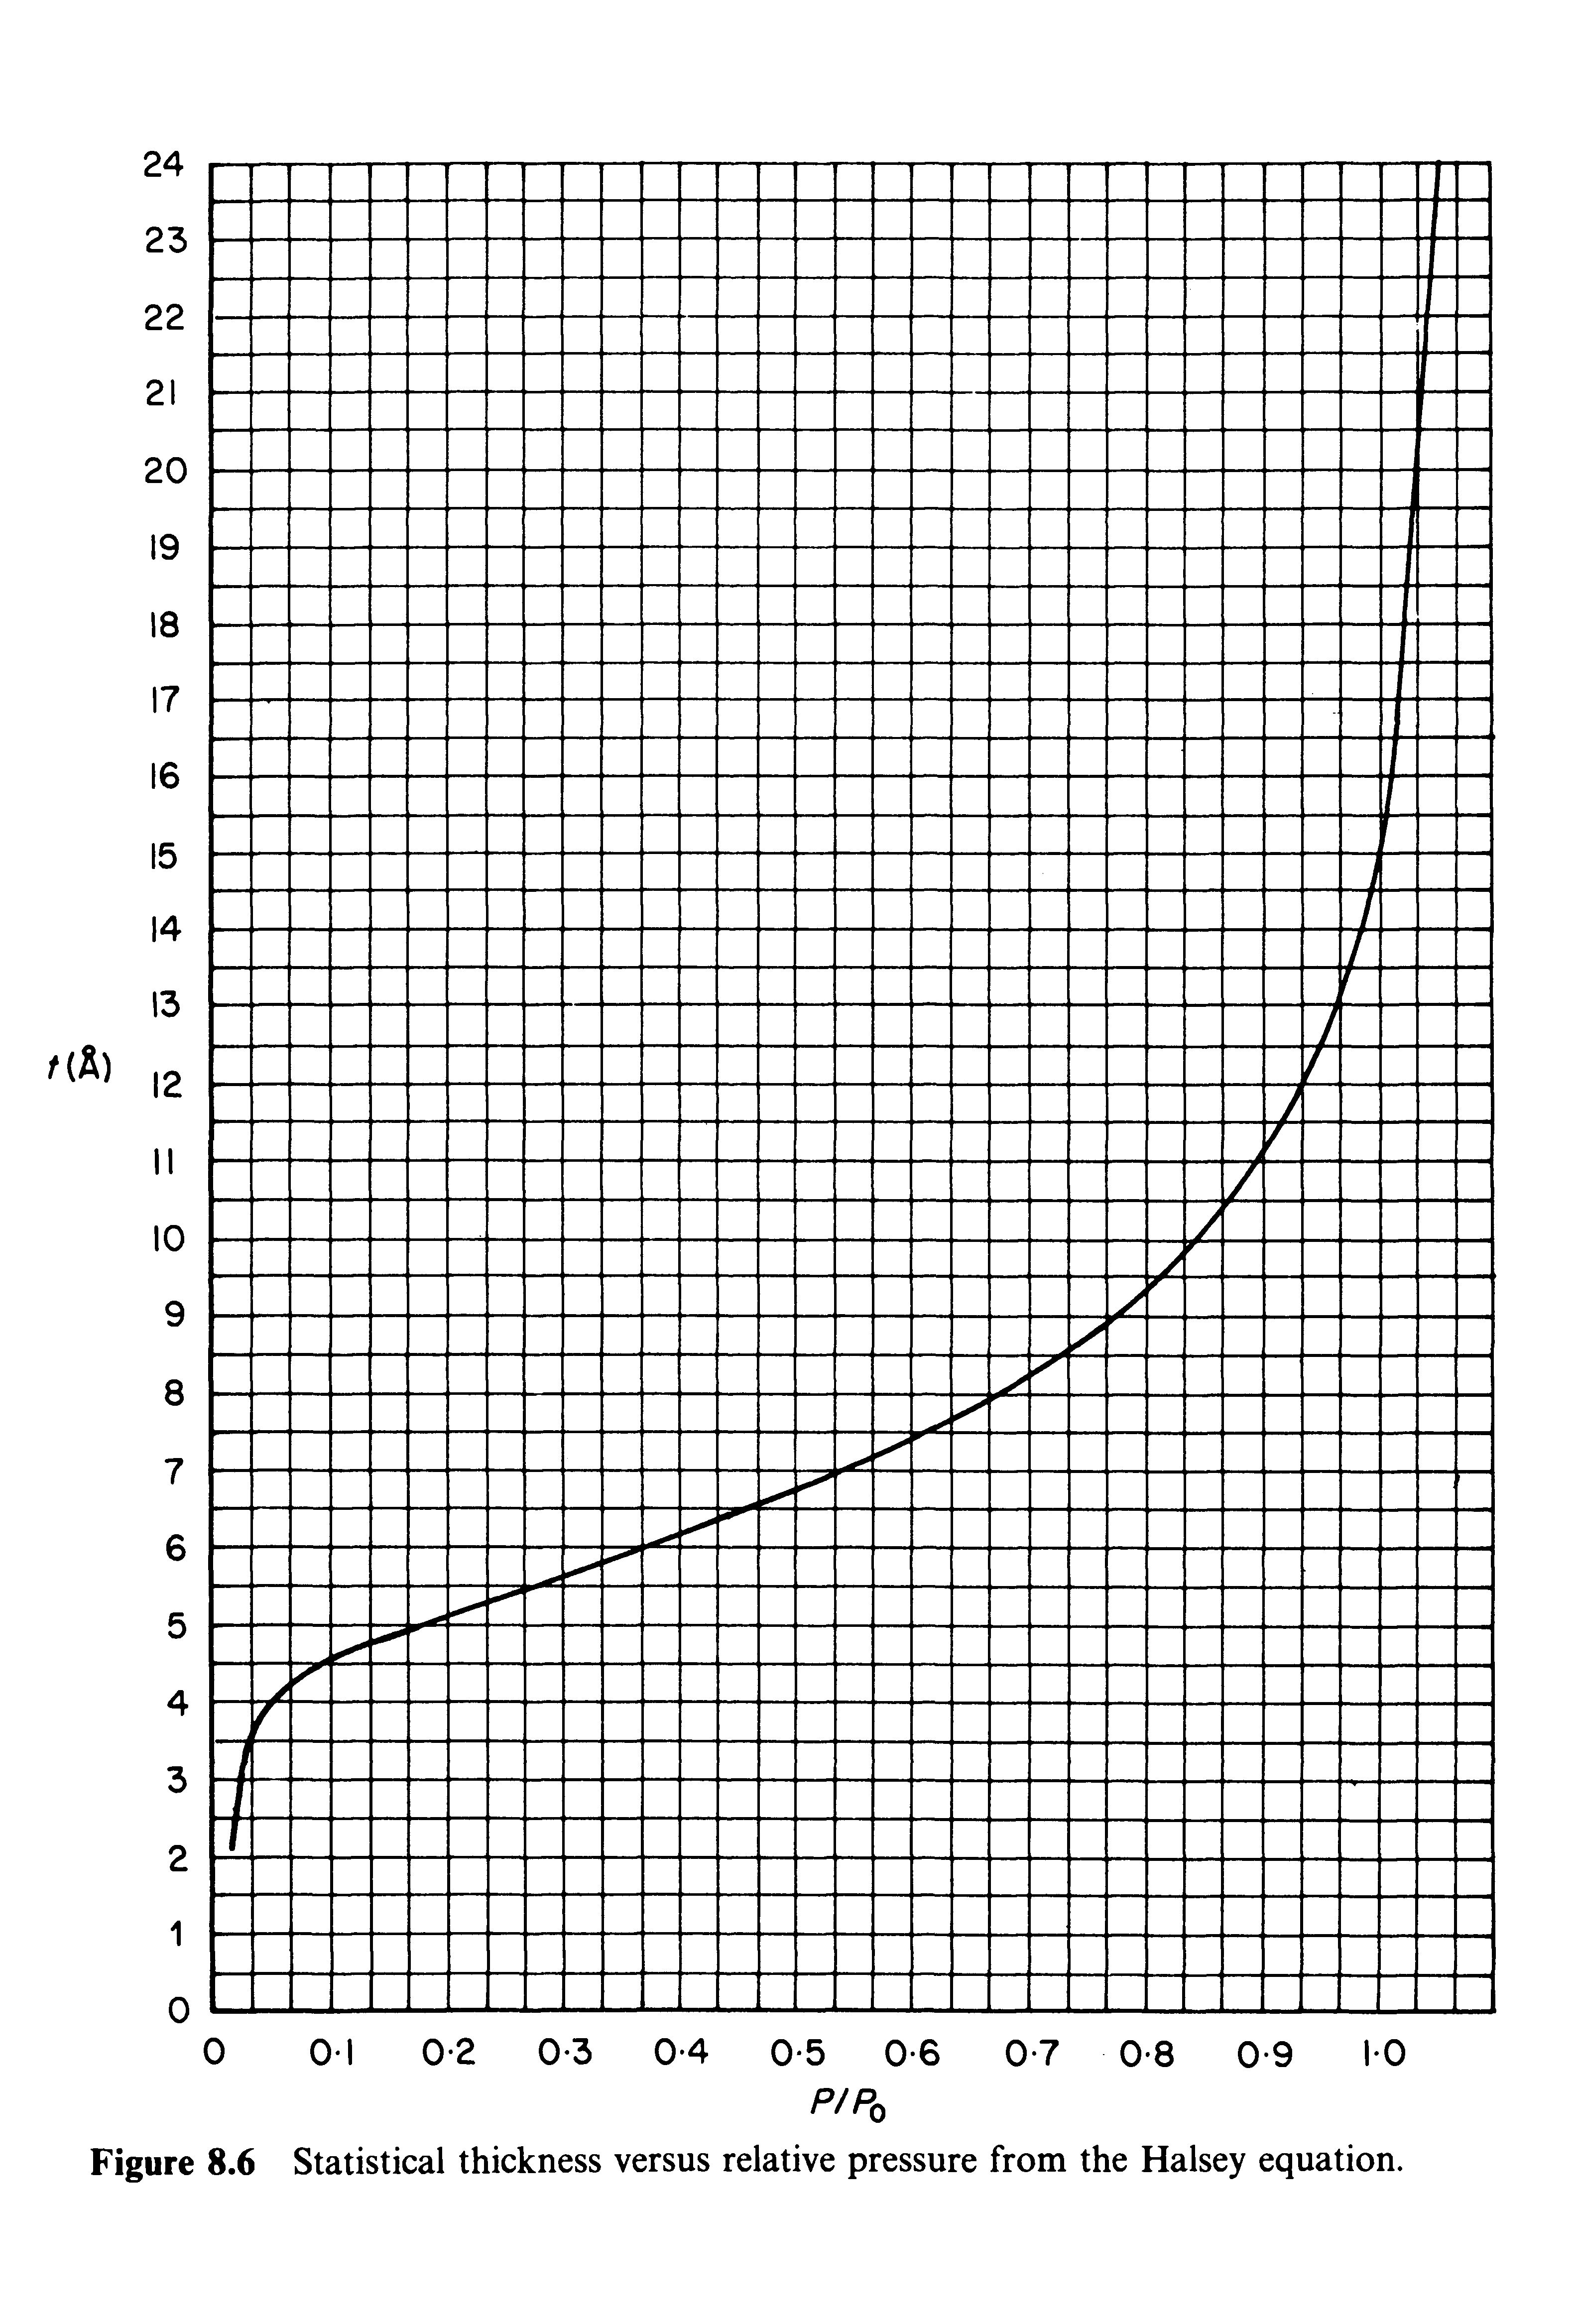 Figure 8.6 Statistical thickness versus relative pressure from the Halsey equation.